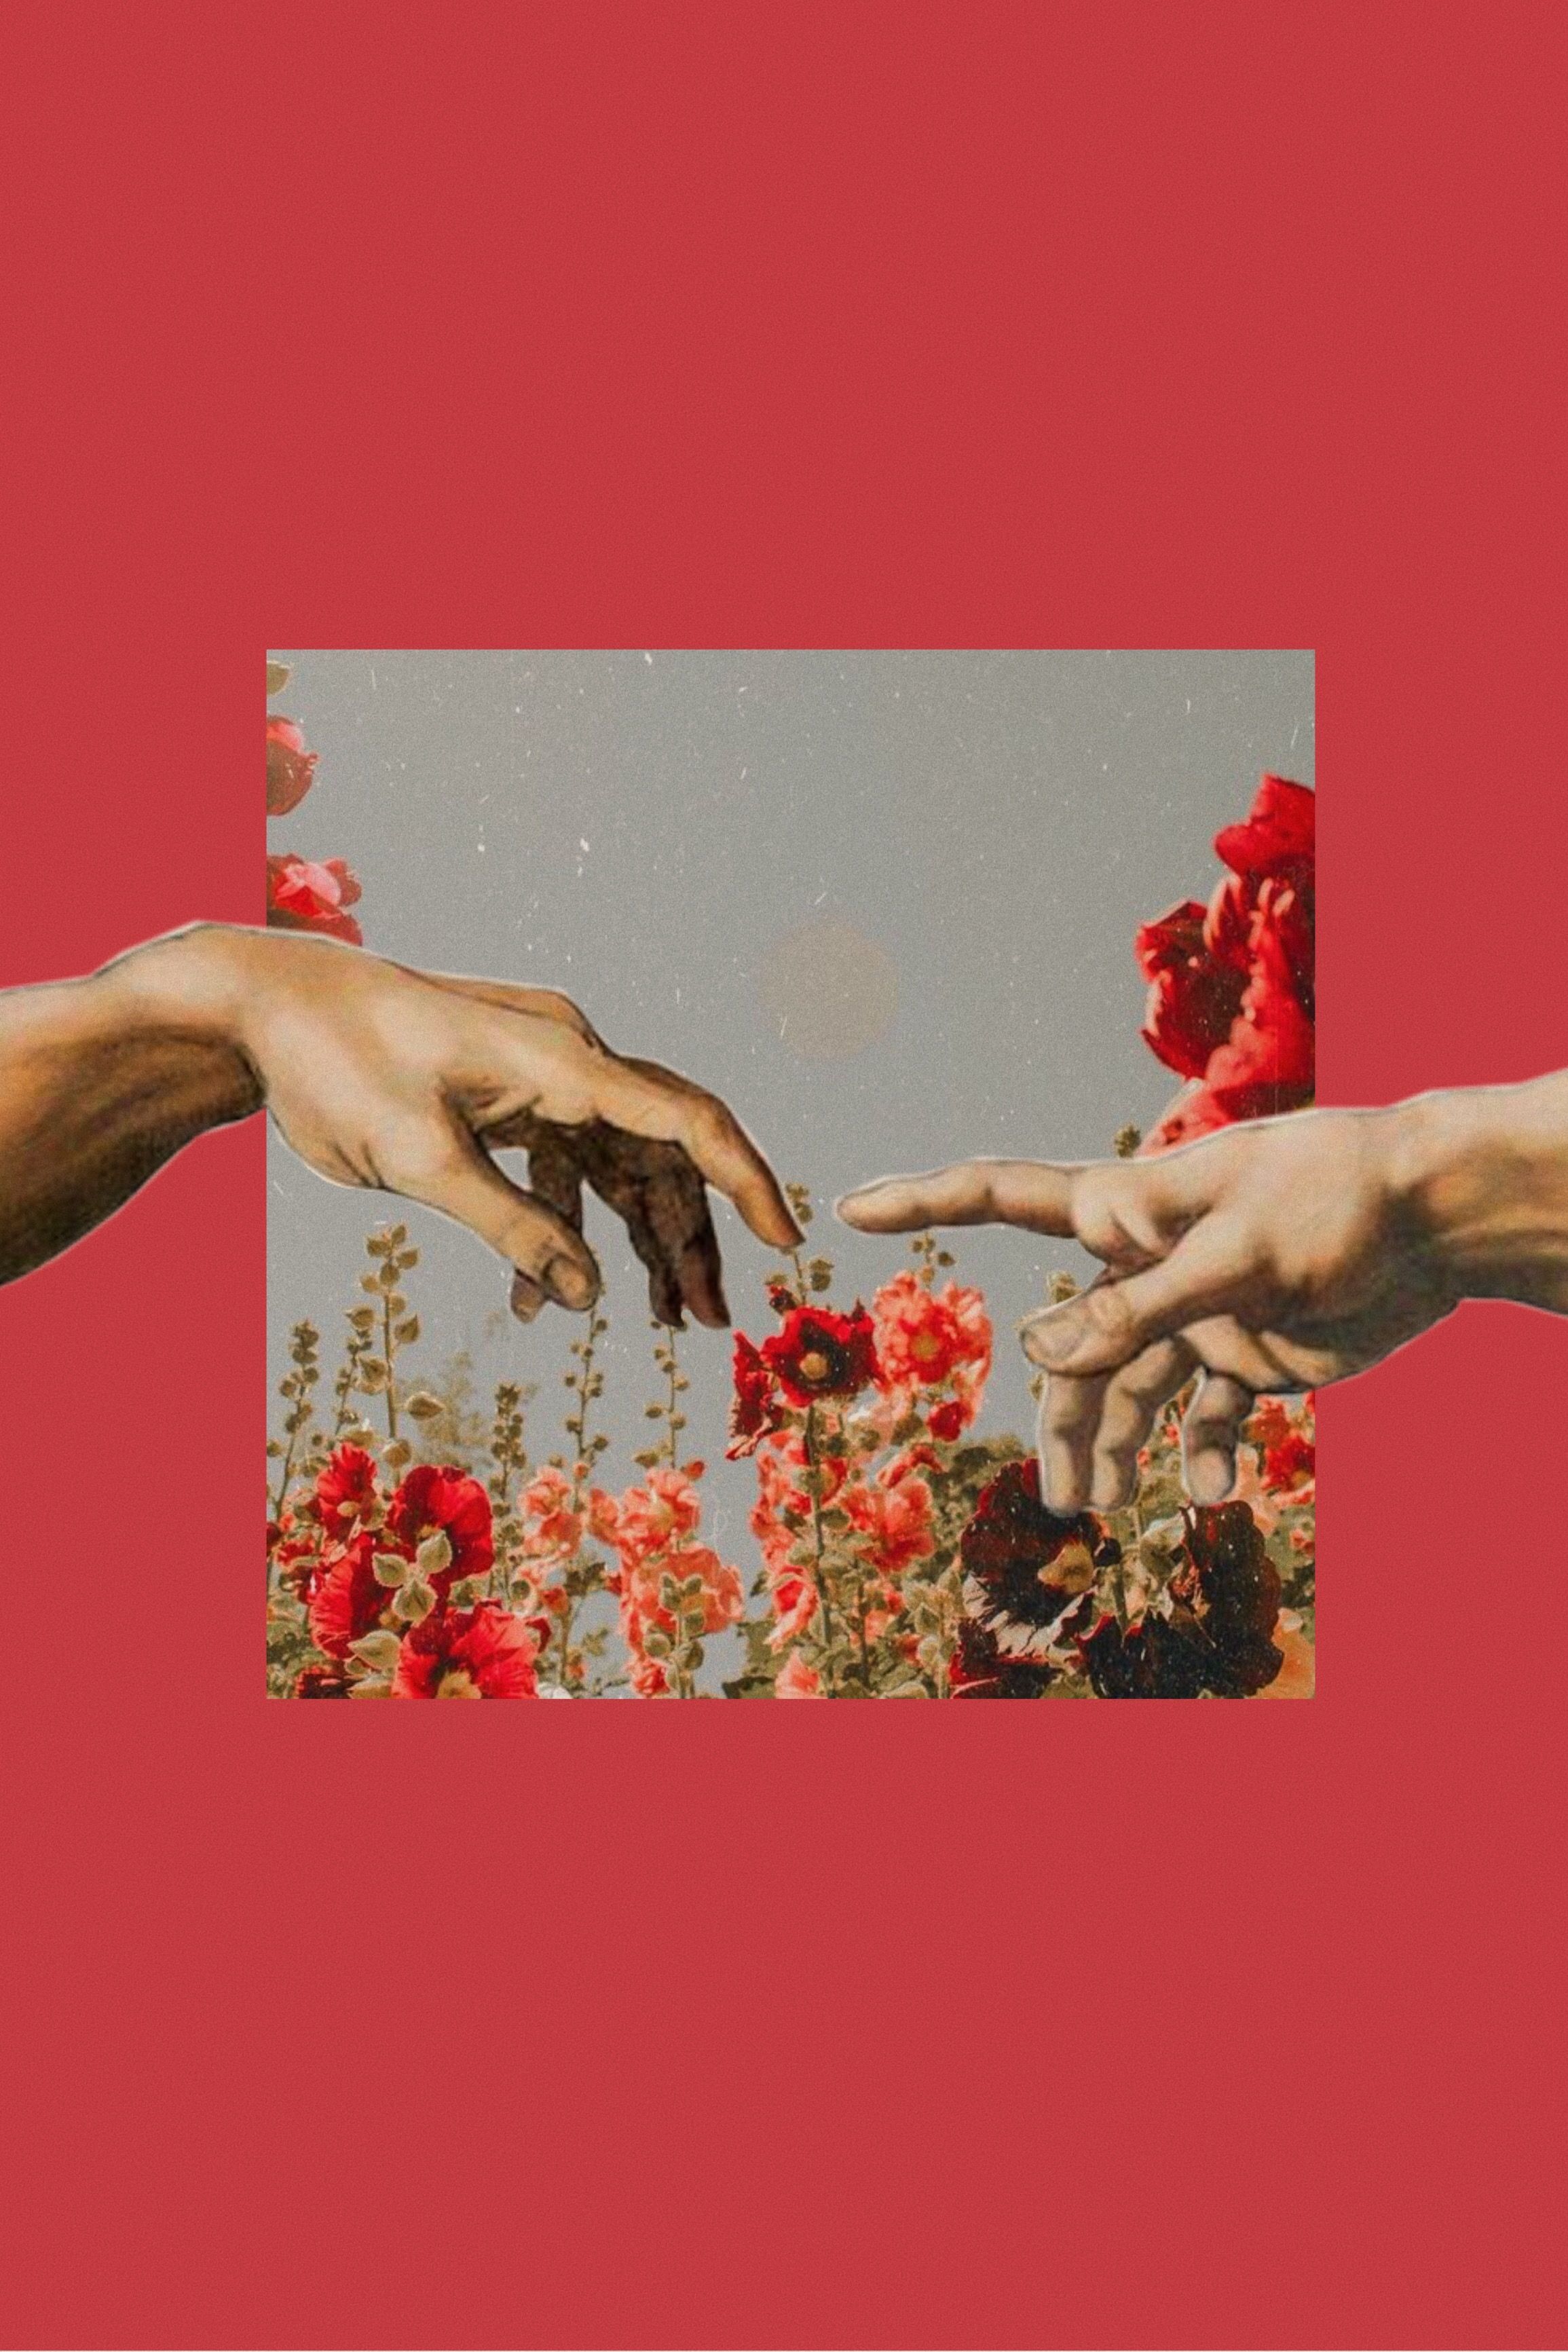 A collage of two hands reaching for each other in front of a field of flowers. - Art